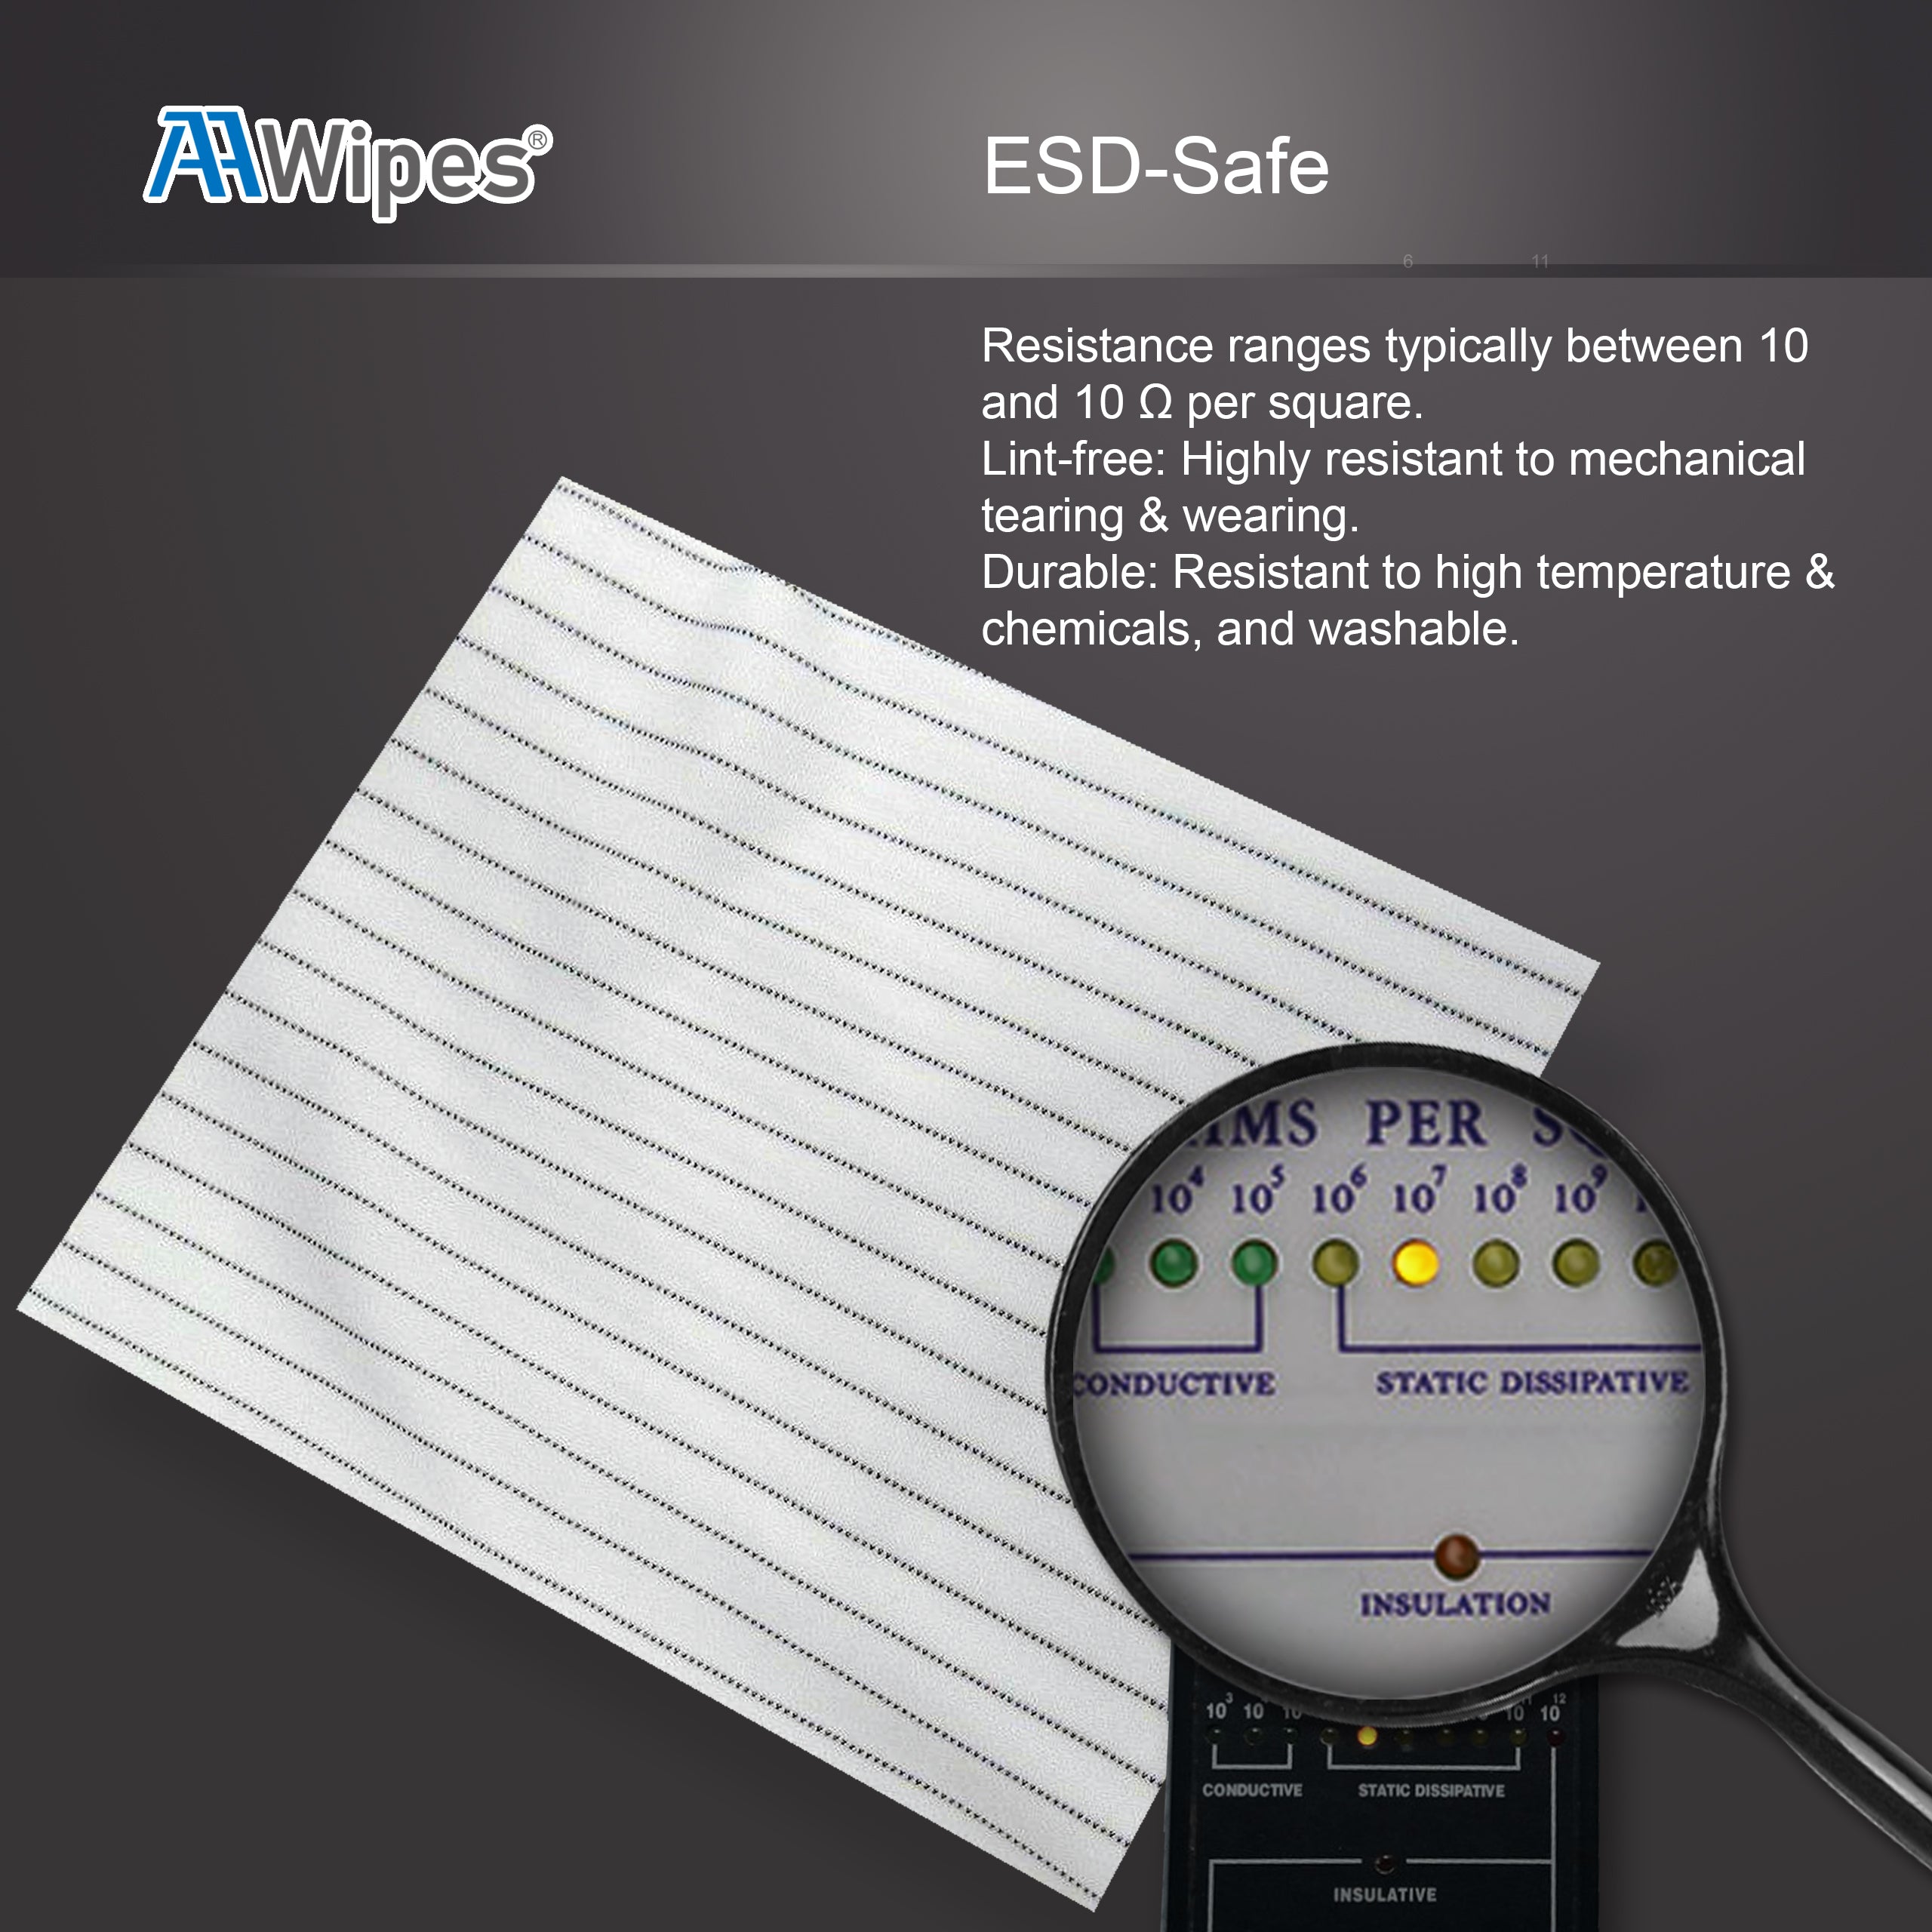 Anti-Static Electrostatic Discharge (ESD) Wipes (6"x6",100pcs, Polyester Wiper Cloths with Conductive Yarn) ESD-Safer Cleanroom Wipers Lint Free Class 100 ISO 5. 4,000 Wipes/Box, 40 Bags (No. CE16006).